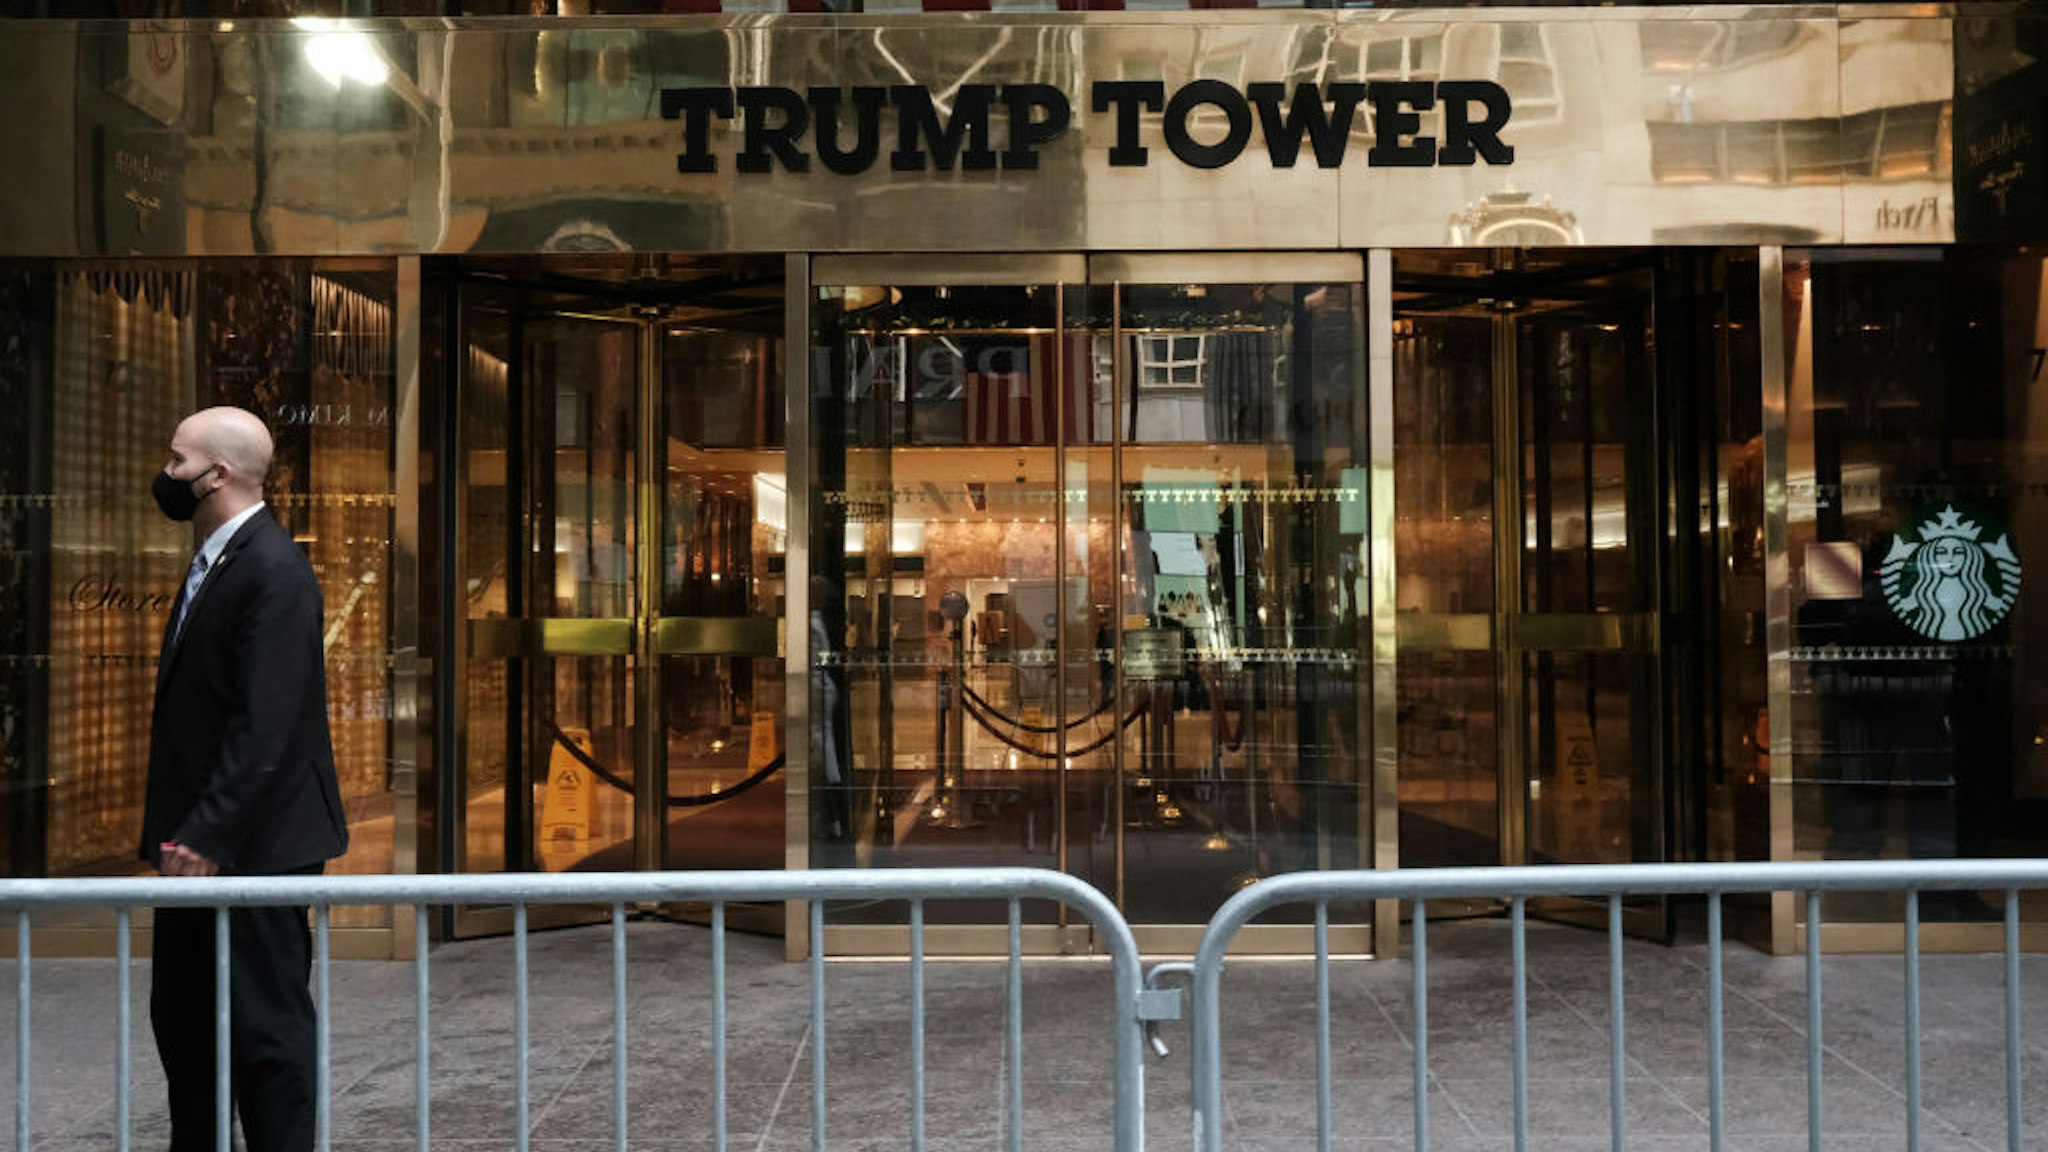 People walk past the Trump Tower as the impeachment trial of Donald Trump begins in Washington on February 09, 2021 in New York City.